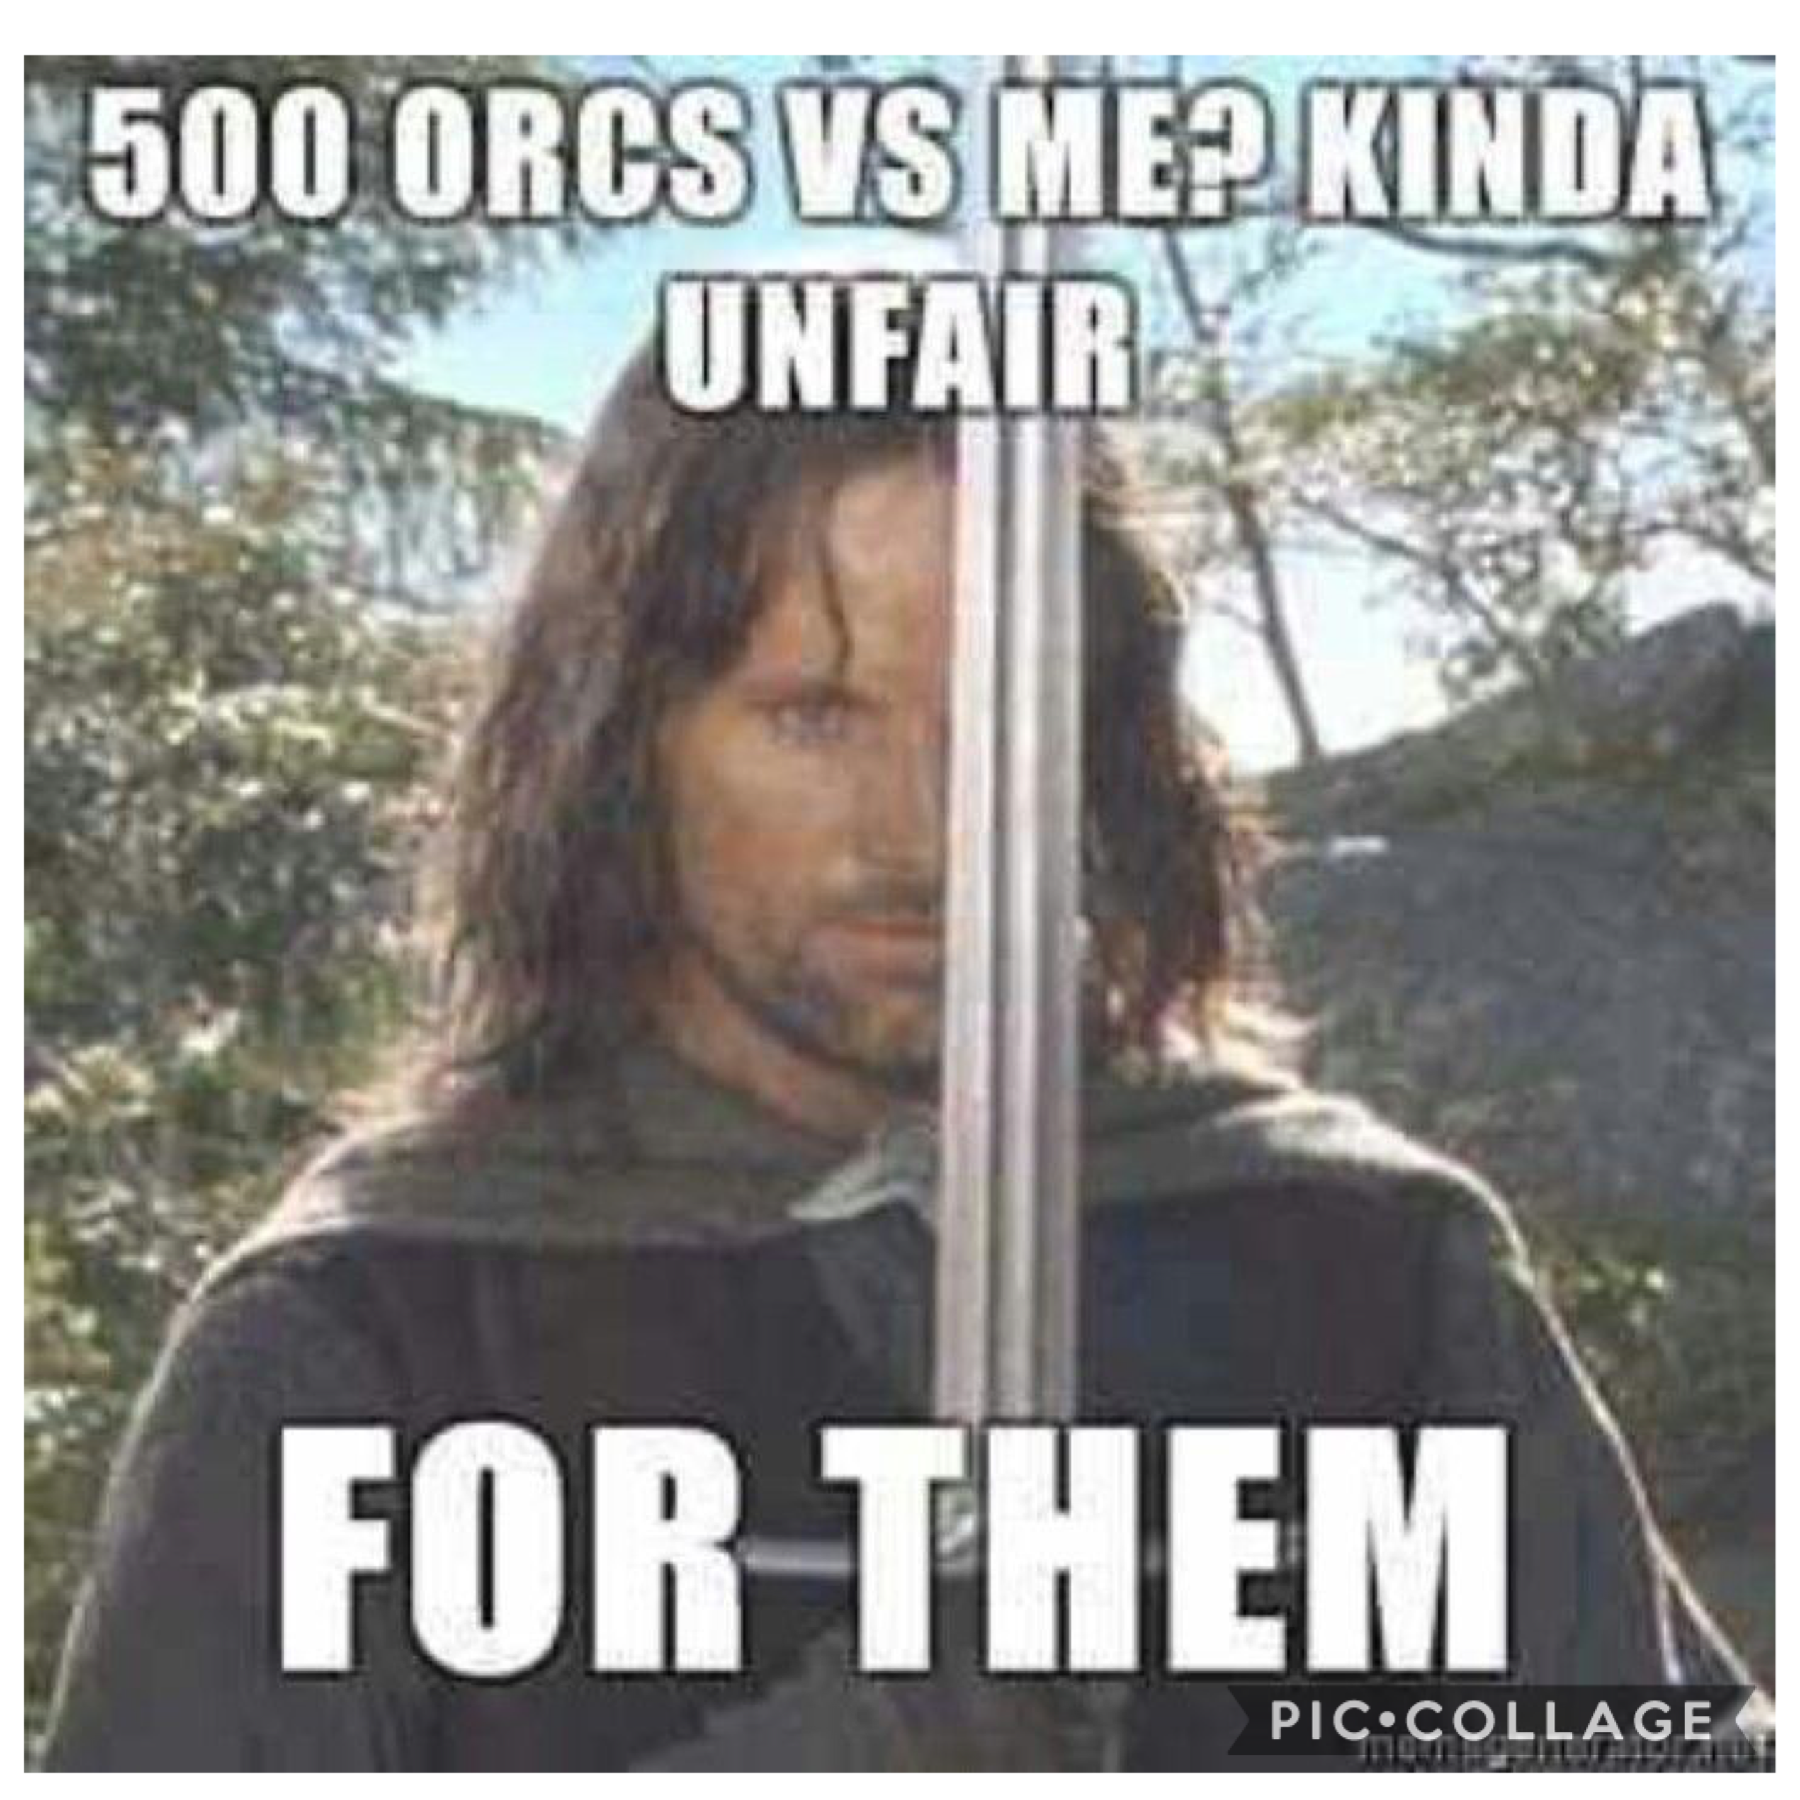 yes Aragorn we know